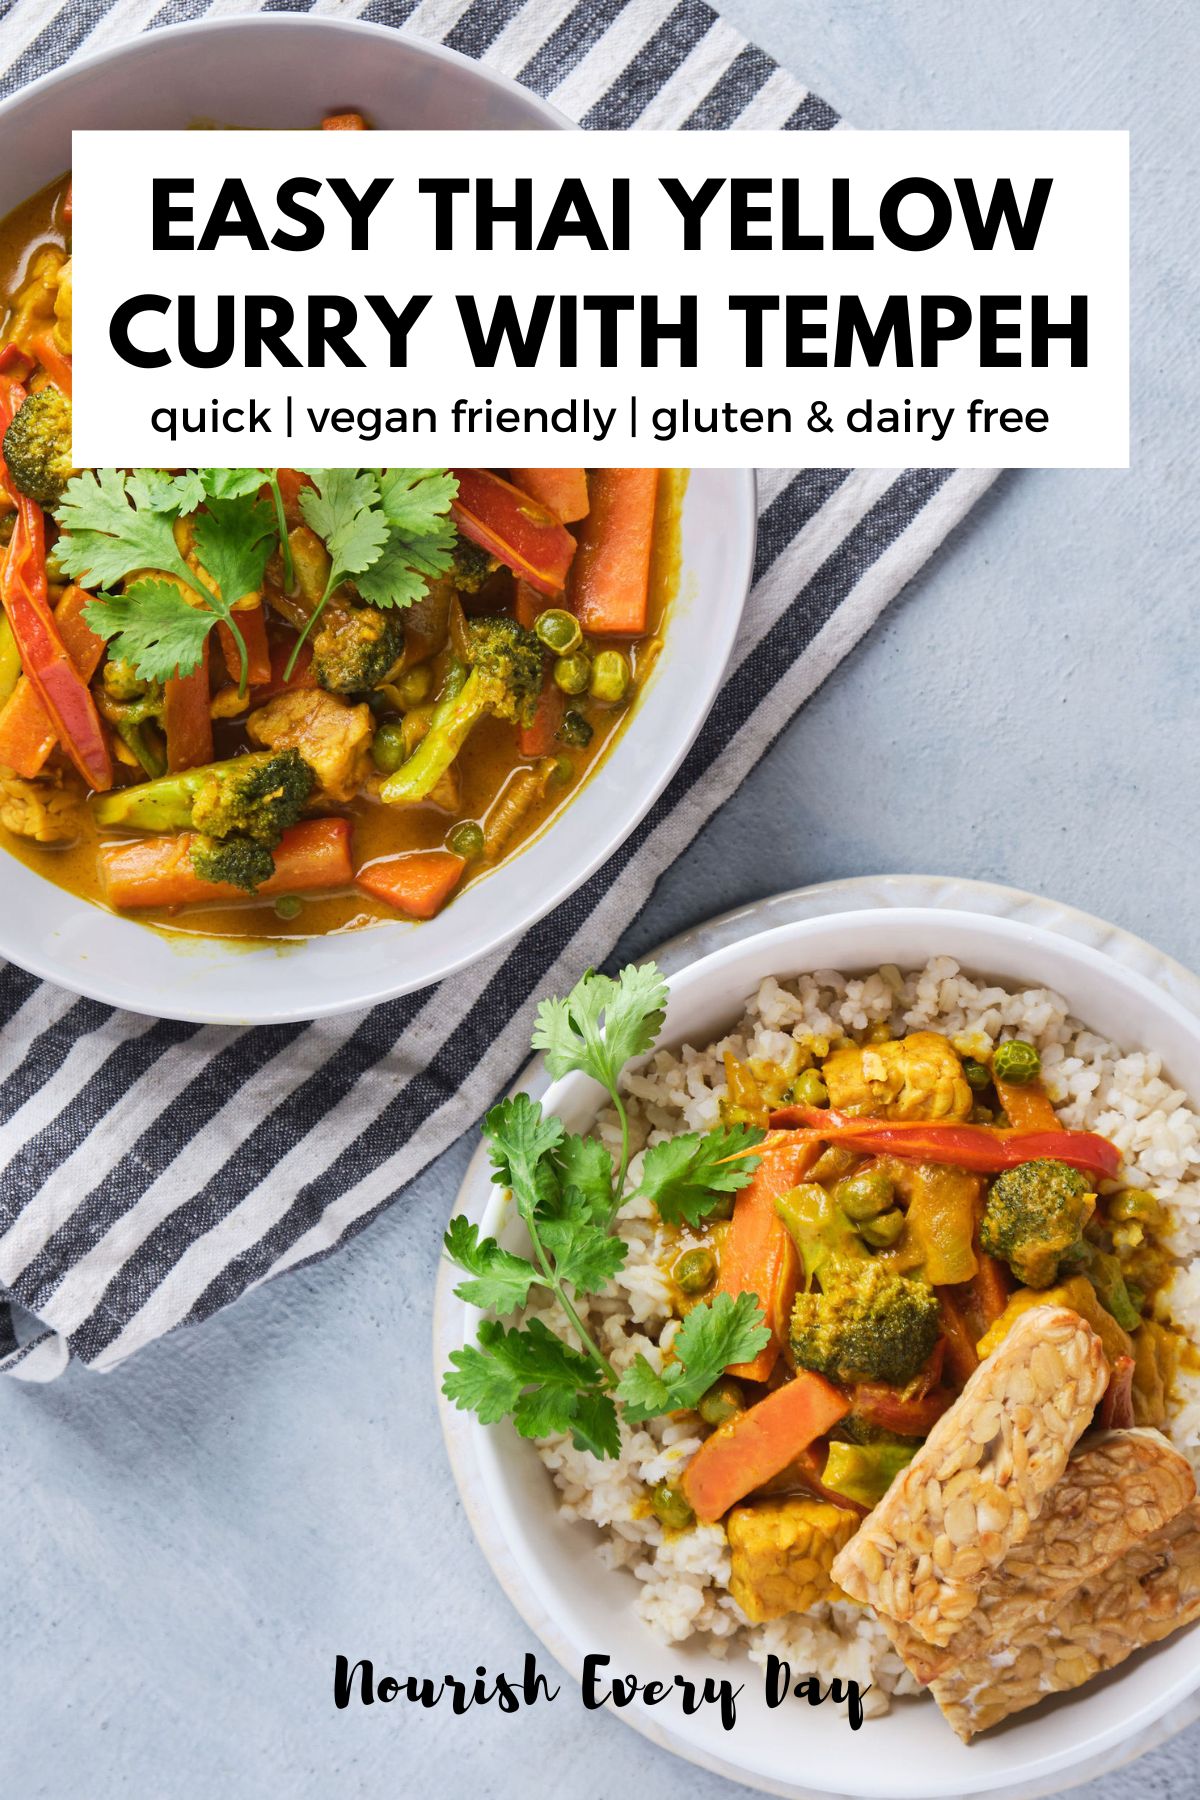 Easy Yellow Curry with Tempeh - Nourish Every Day